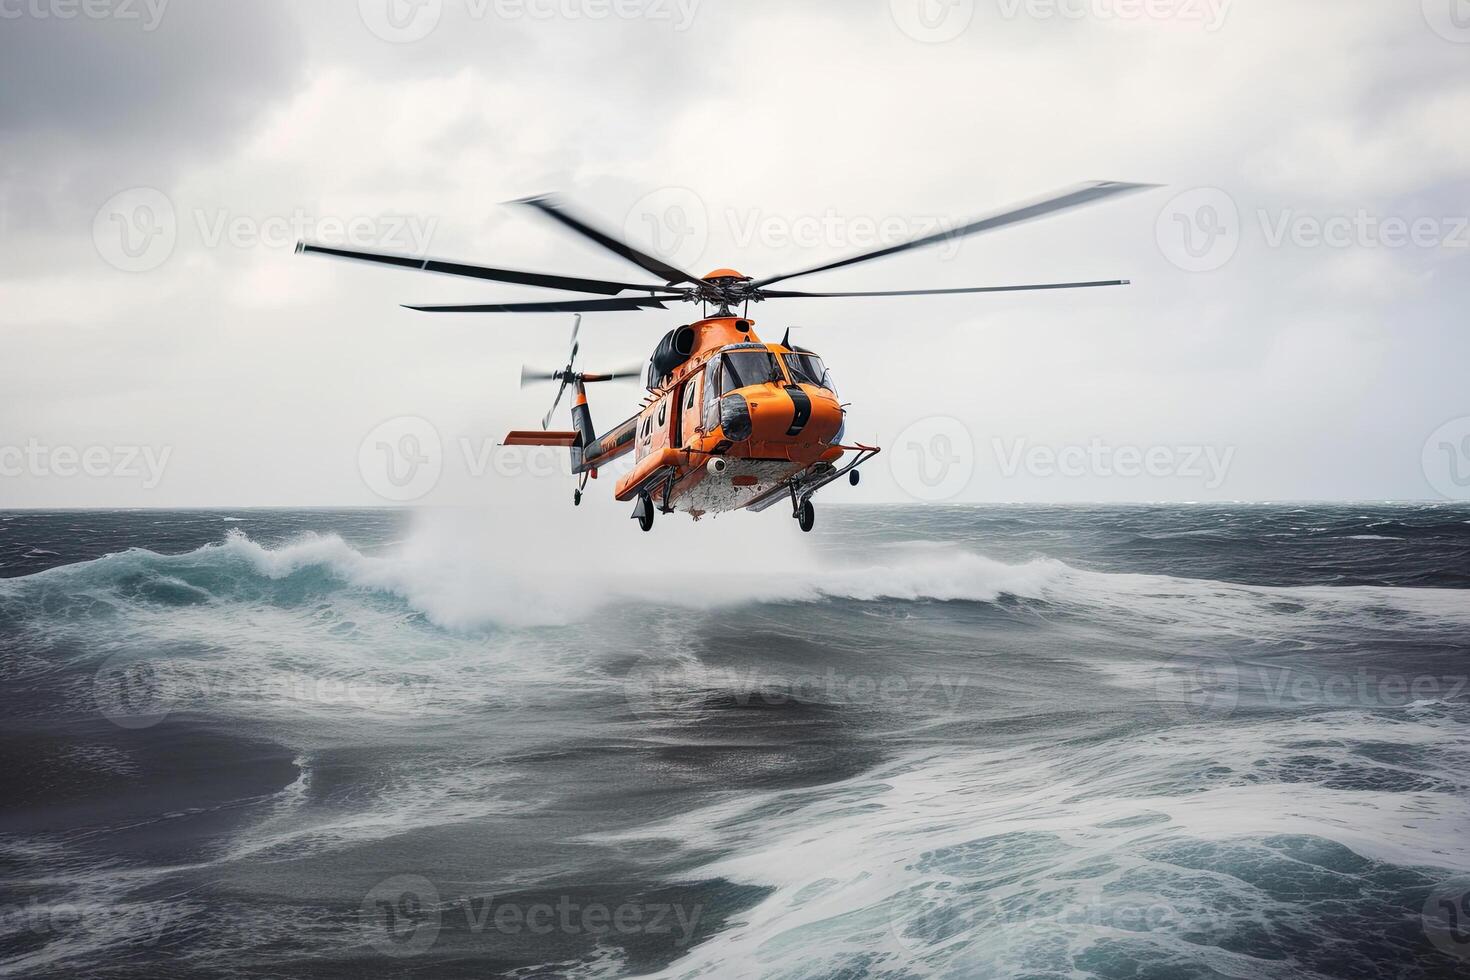 Search and rescue operation in sea. Emergency rescue helicopter flies over sea surface, looking for victims after crash. Created with photo